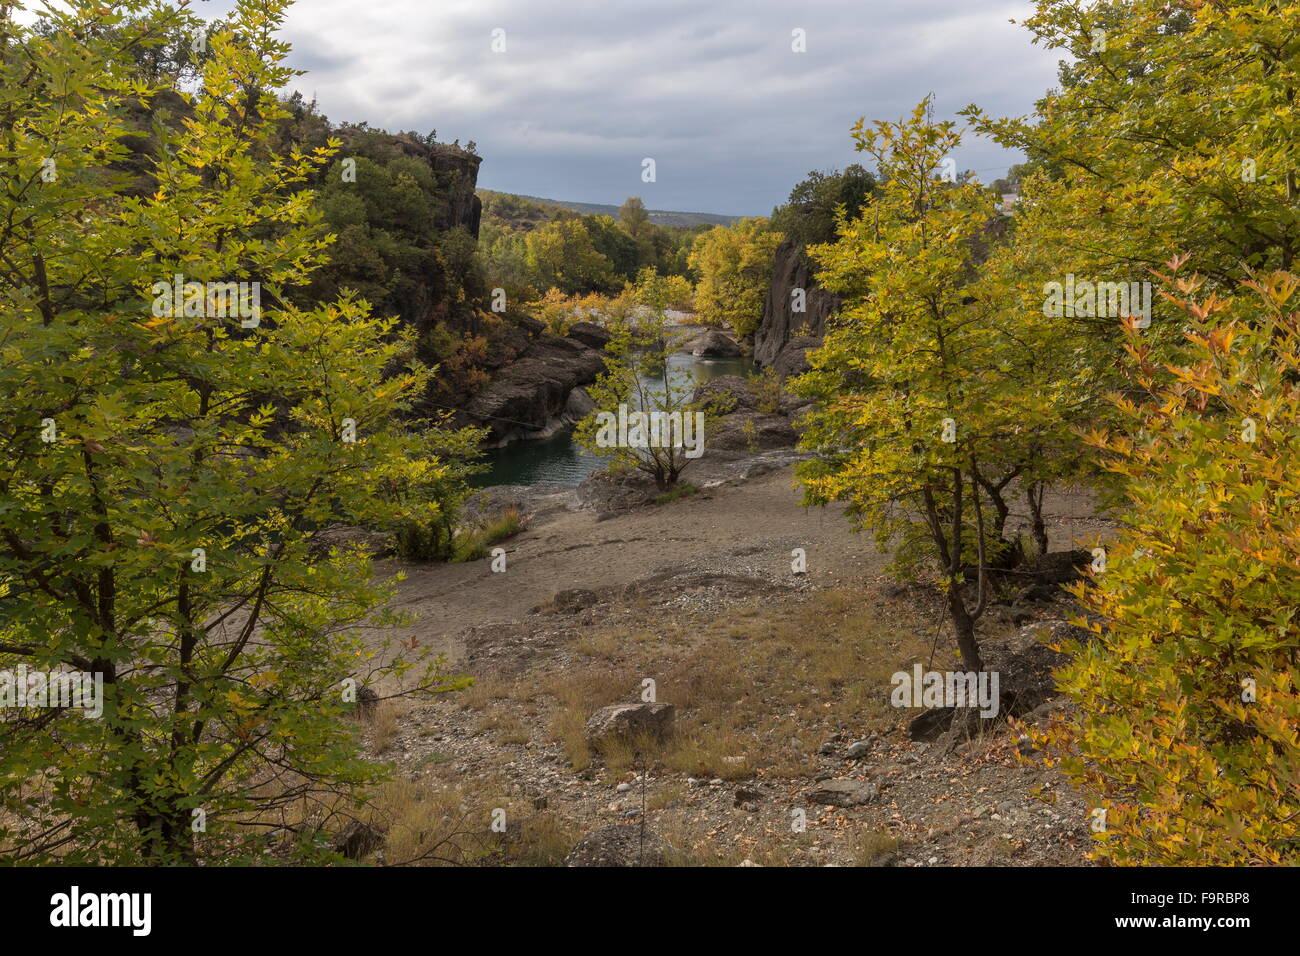 The conglomerate Venetikos river gorge, south of Grevena Stock Photo